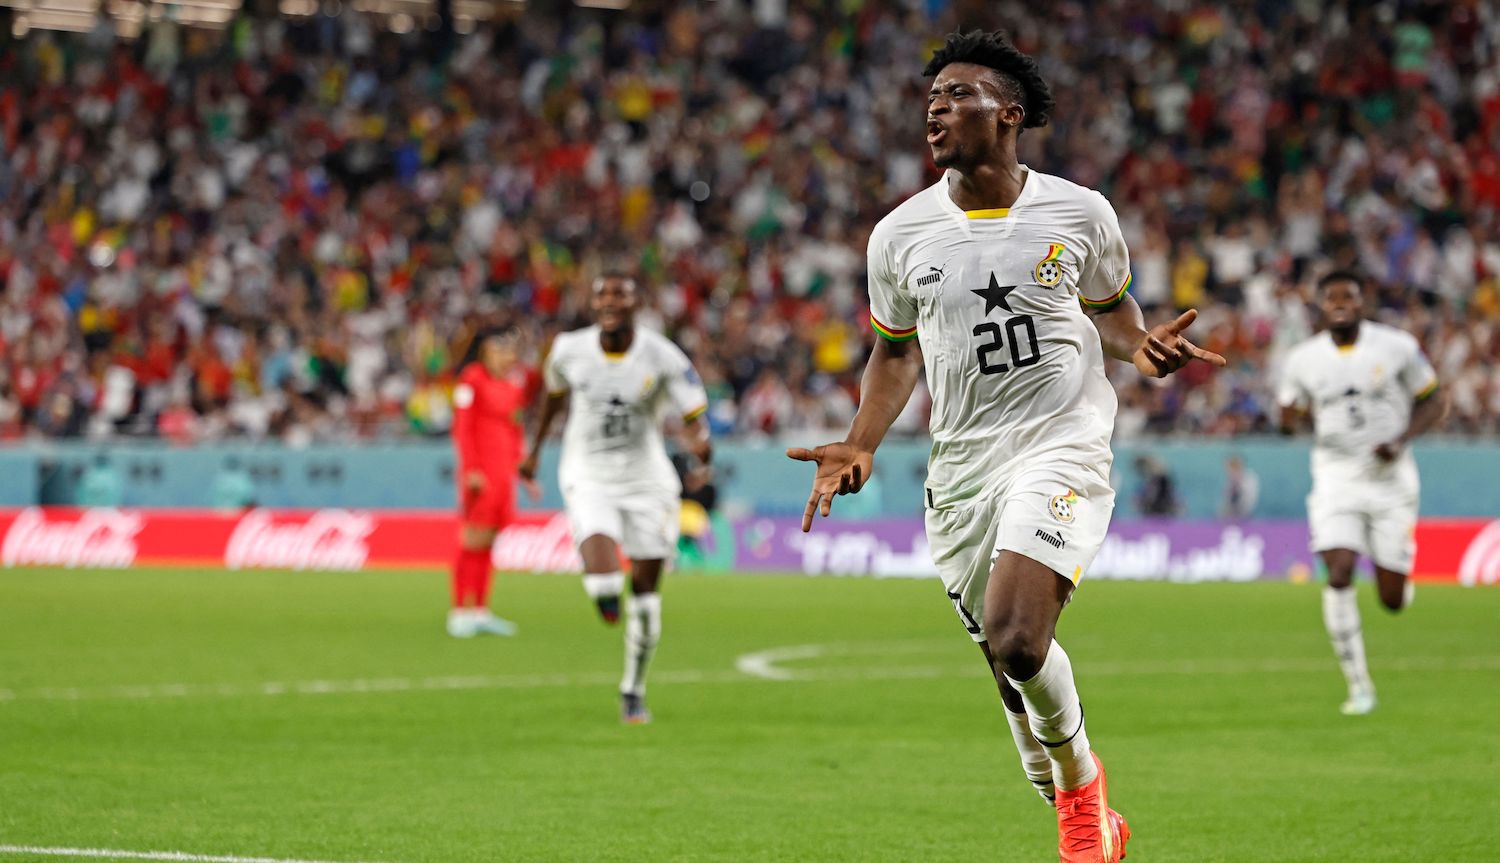 Ghana's midfielder #20 Mohammed Kudus celebrates scoring his team's third goal during the Qatar 2022 World Cup Group H football match between South Korea and Ghana at the Education City Stadium in Al-Rayyan, west of Doha, on November 28, 2022. (Photo by Khaled DESOUKI / AFP) (Photo by KHALED DESOUKI/AFP via Getty Images)